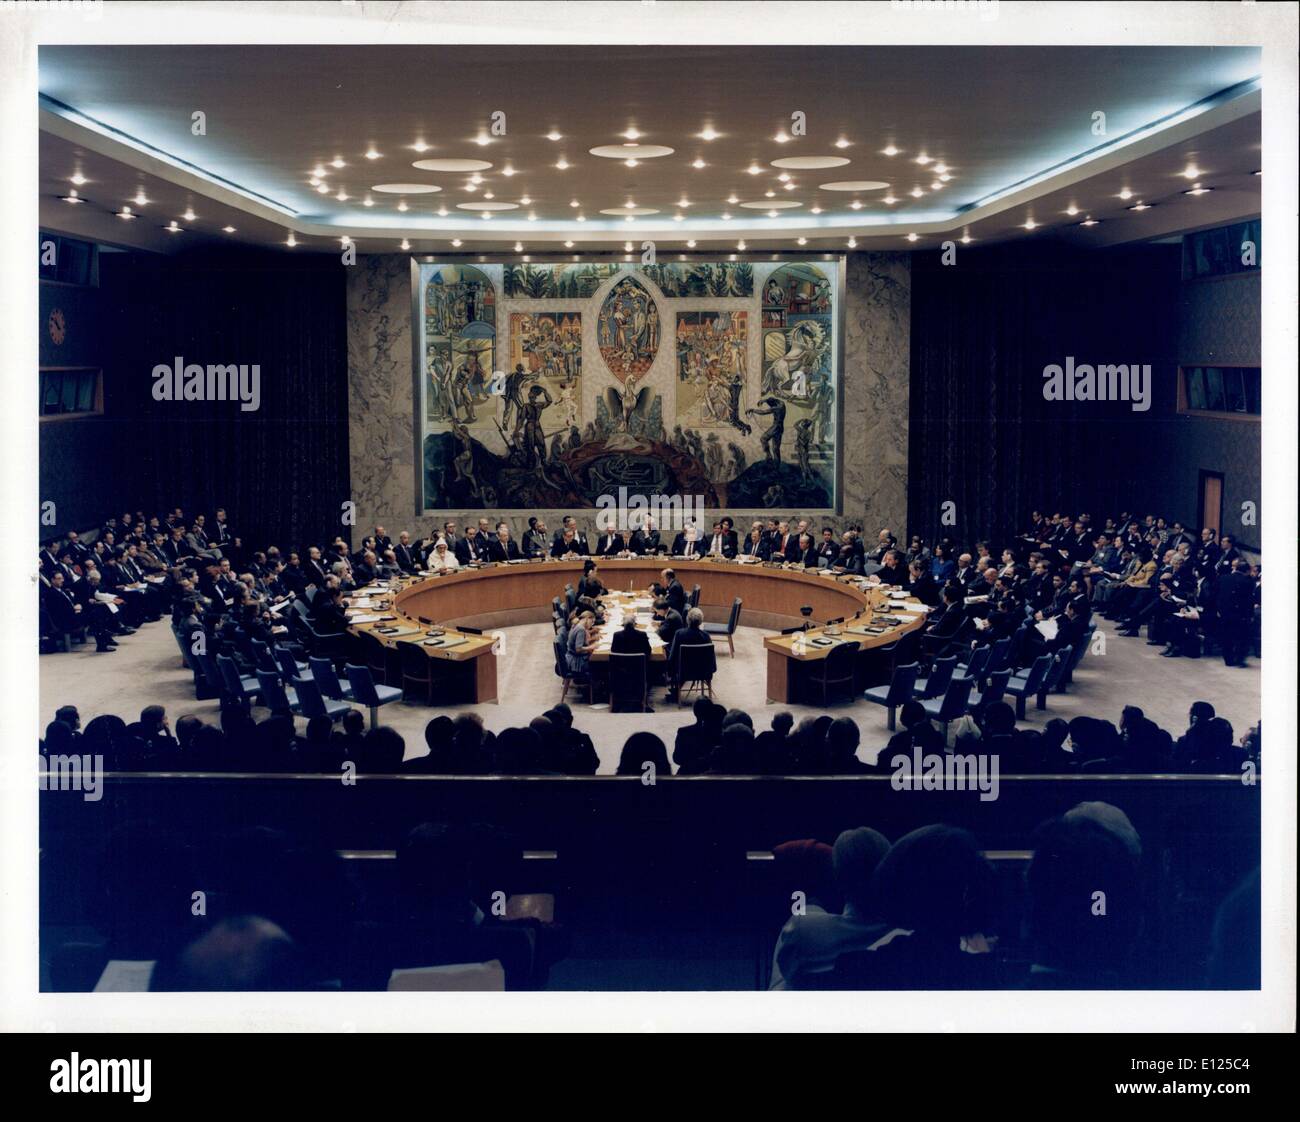 Jan. 31, 1992 - At a time of momentum change, the first summit-level meeting of the United Nations Security Council was held today. The meeting reaffirmed the central role of the Security Council in maintaining world peace and the principle of collective security. Attending the meeting were 13 heads of state and government, as well as two foreign ministers, representing the members of the security countil. The participants issued a declaration that commits them to measures intended to halt the spread of weapons of mass destruction Stock Photo